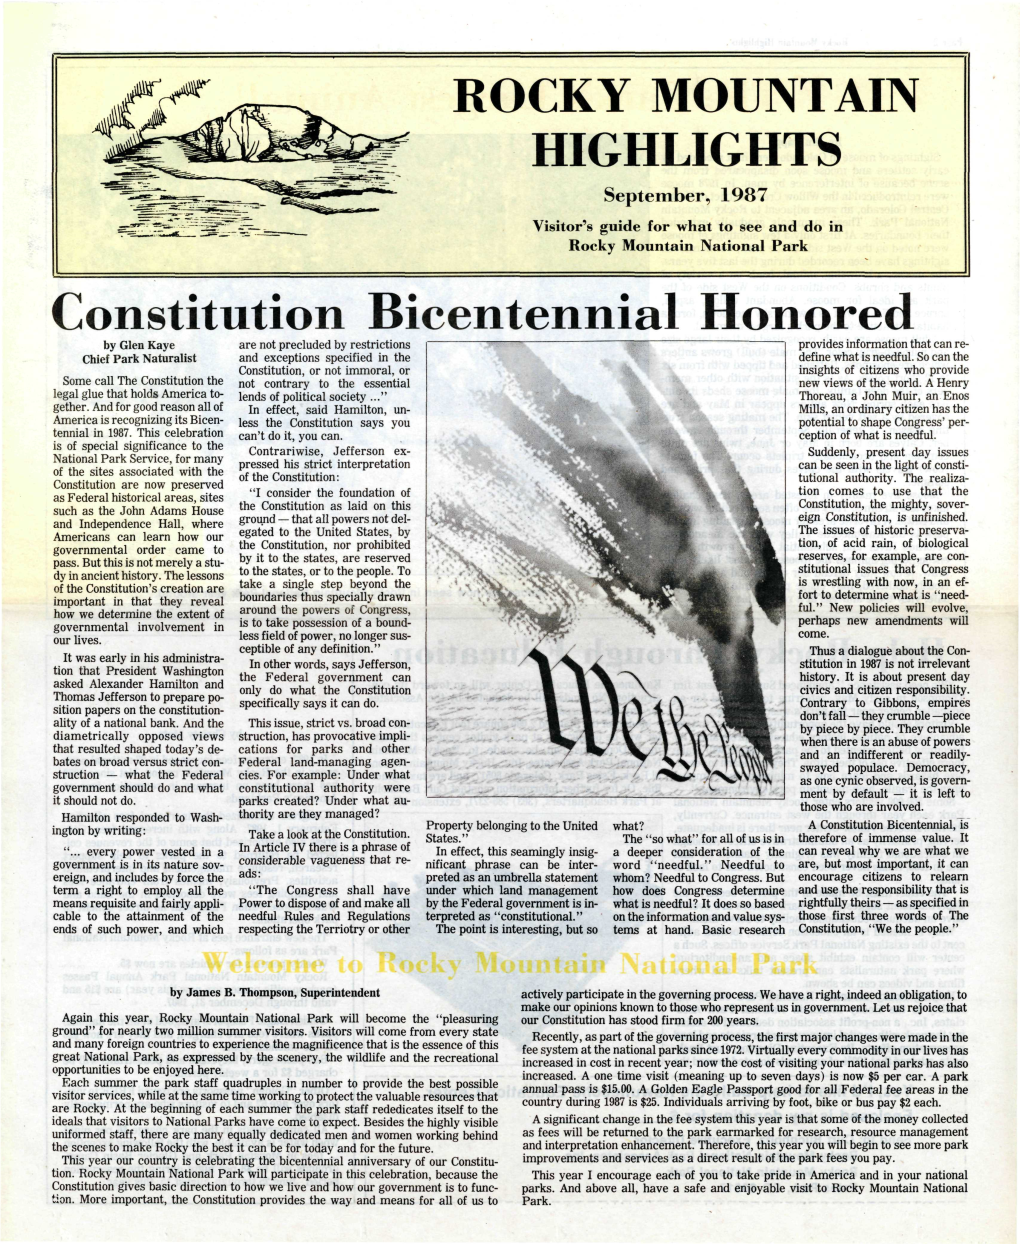 ROCKY MOUNTAIN HIGHLIGHTS Constitution Bicentennial Honored